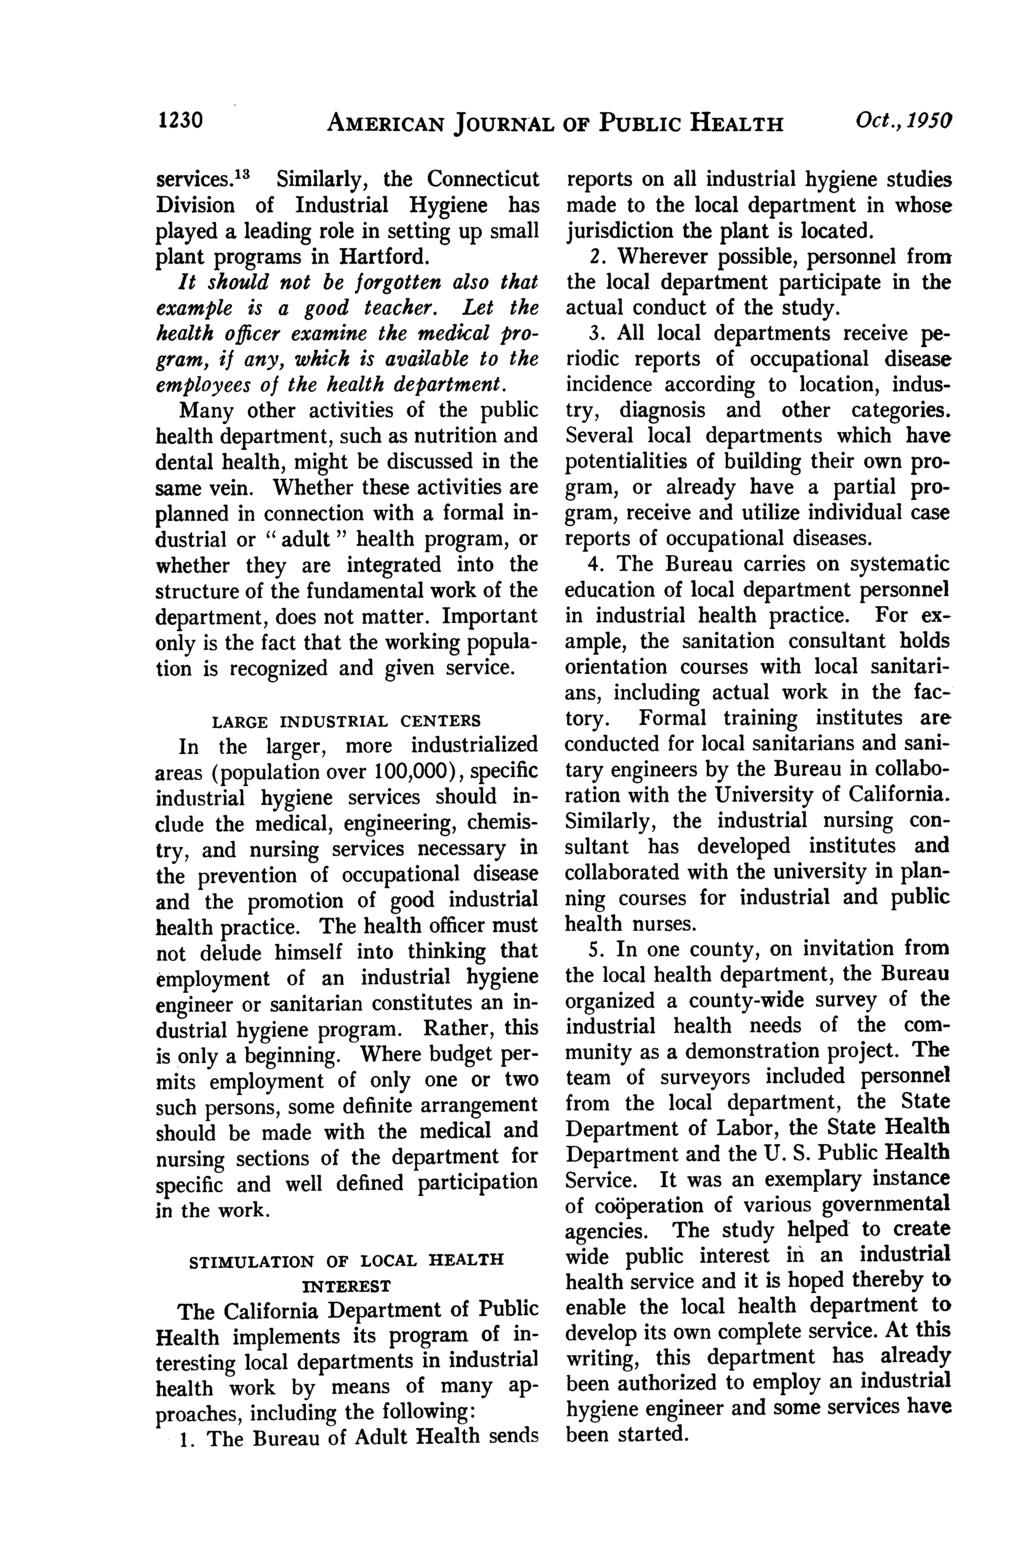 AMERICAN JOURNAL OF PUBLIC HEALTH 1230 Oct., 1950 services.13 Similarly, the Connecticut Division of Industrial Hygiene has played a leading role in setting up small plant programs in Hartford.